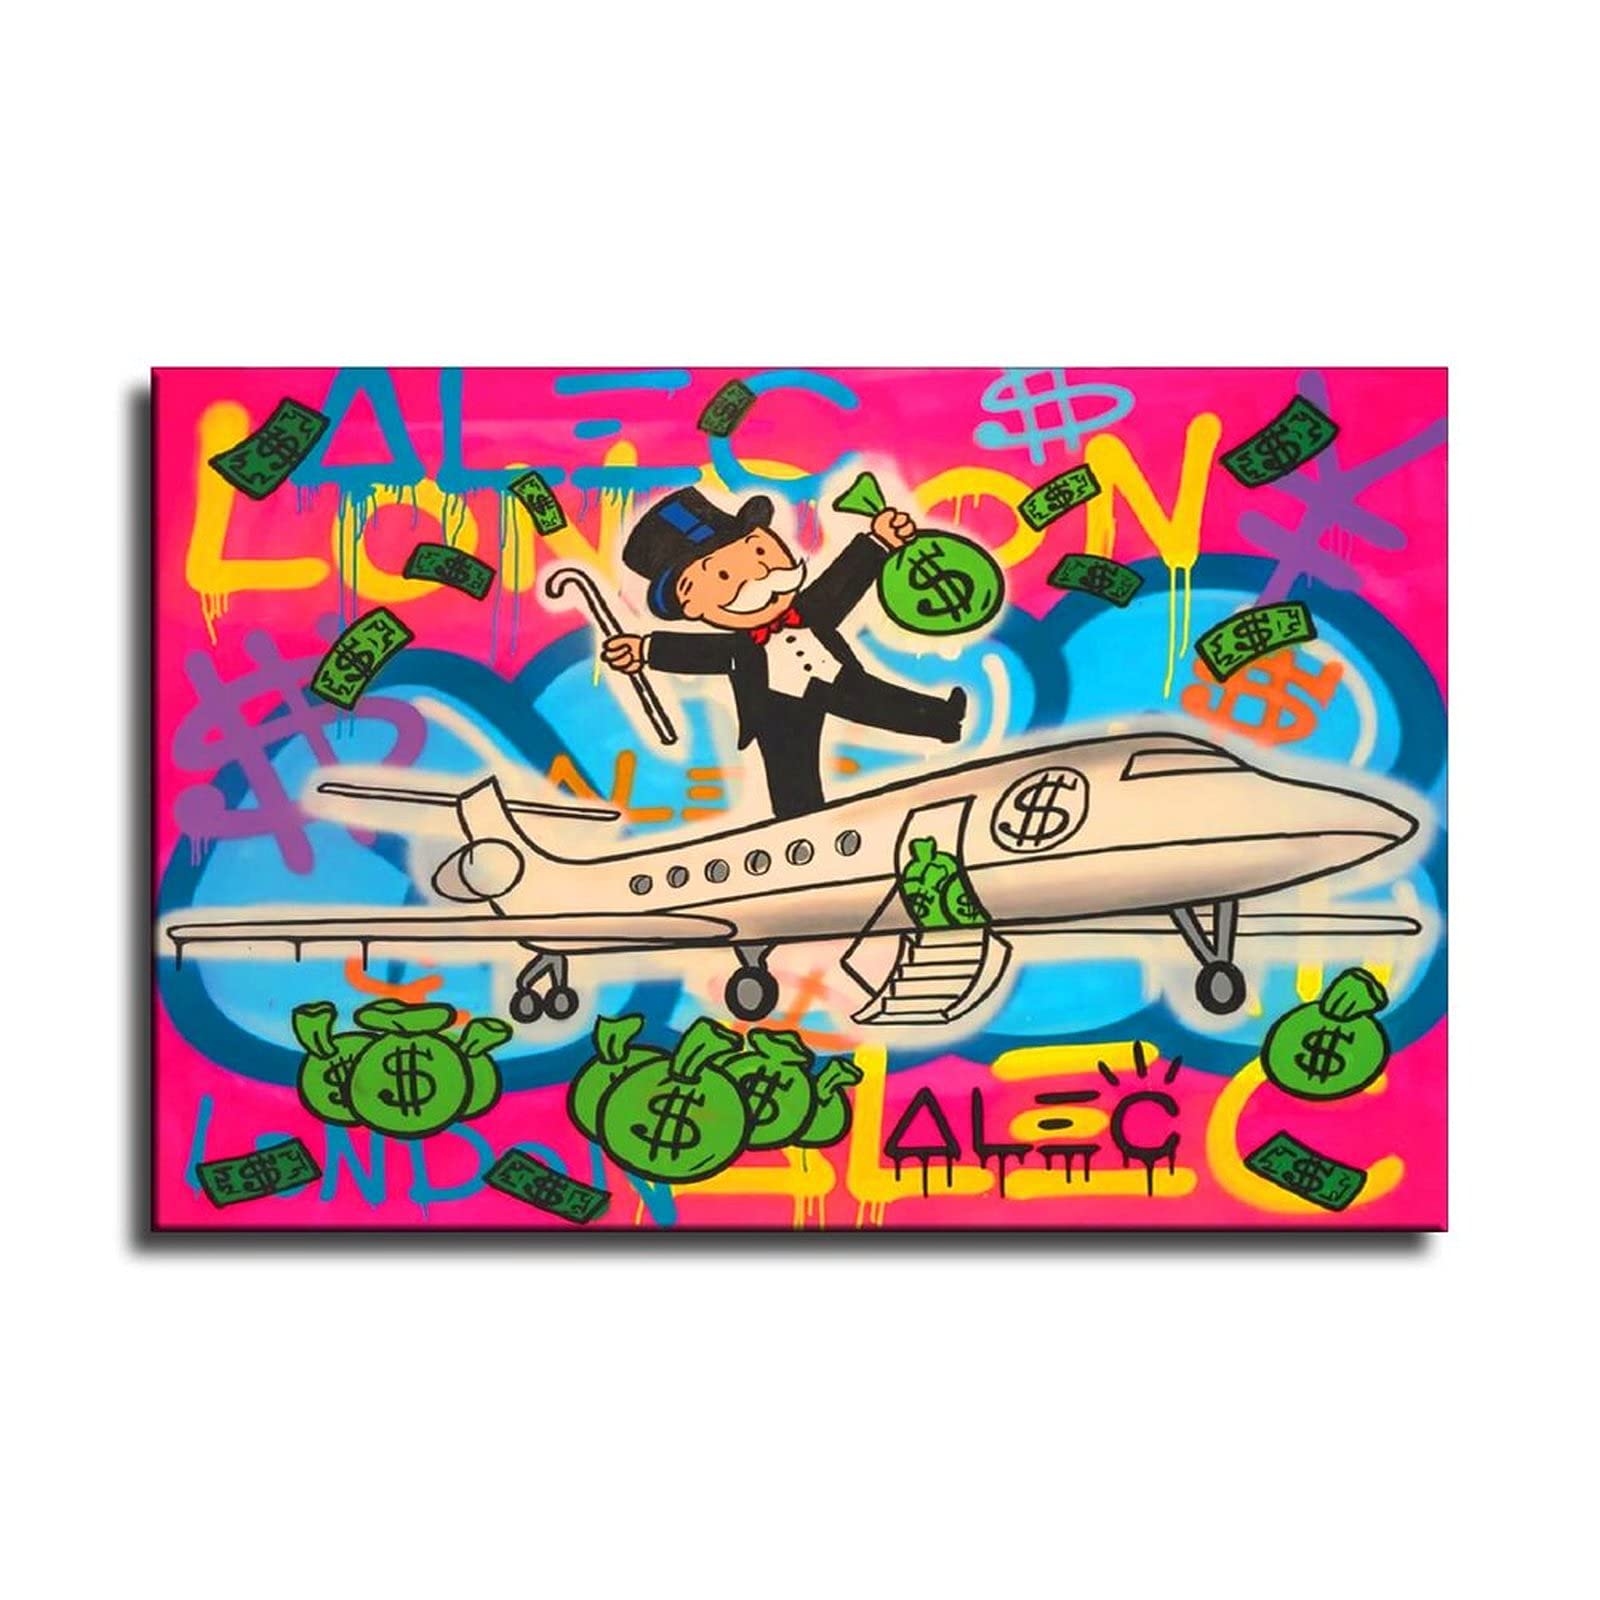 YuFeng_Art_Inn ALEC Monopoly Canvas Art Poster and Wall Art Picture Print Modern Family Bedroom Decor Posters 08×12inch(20×30cm)